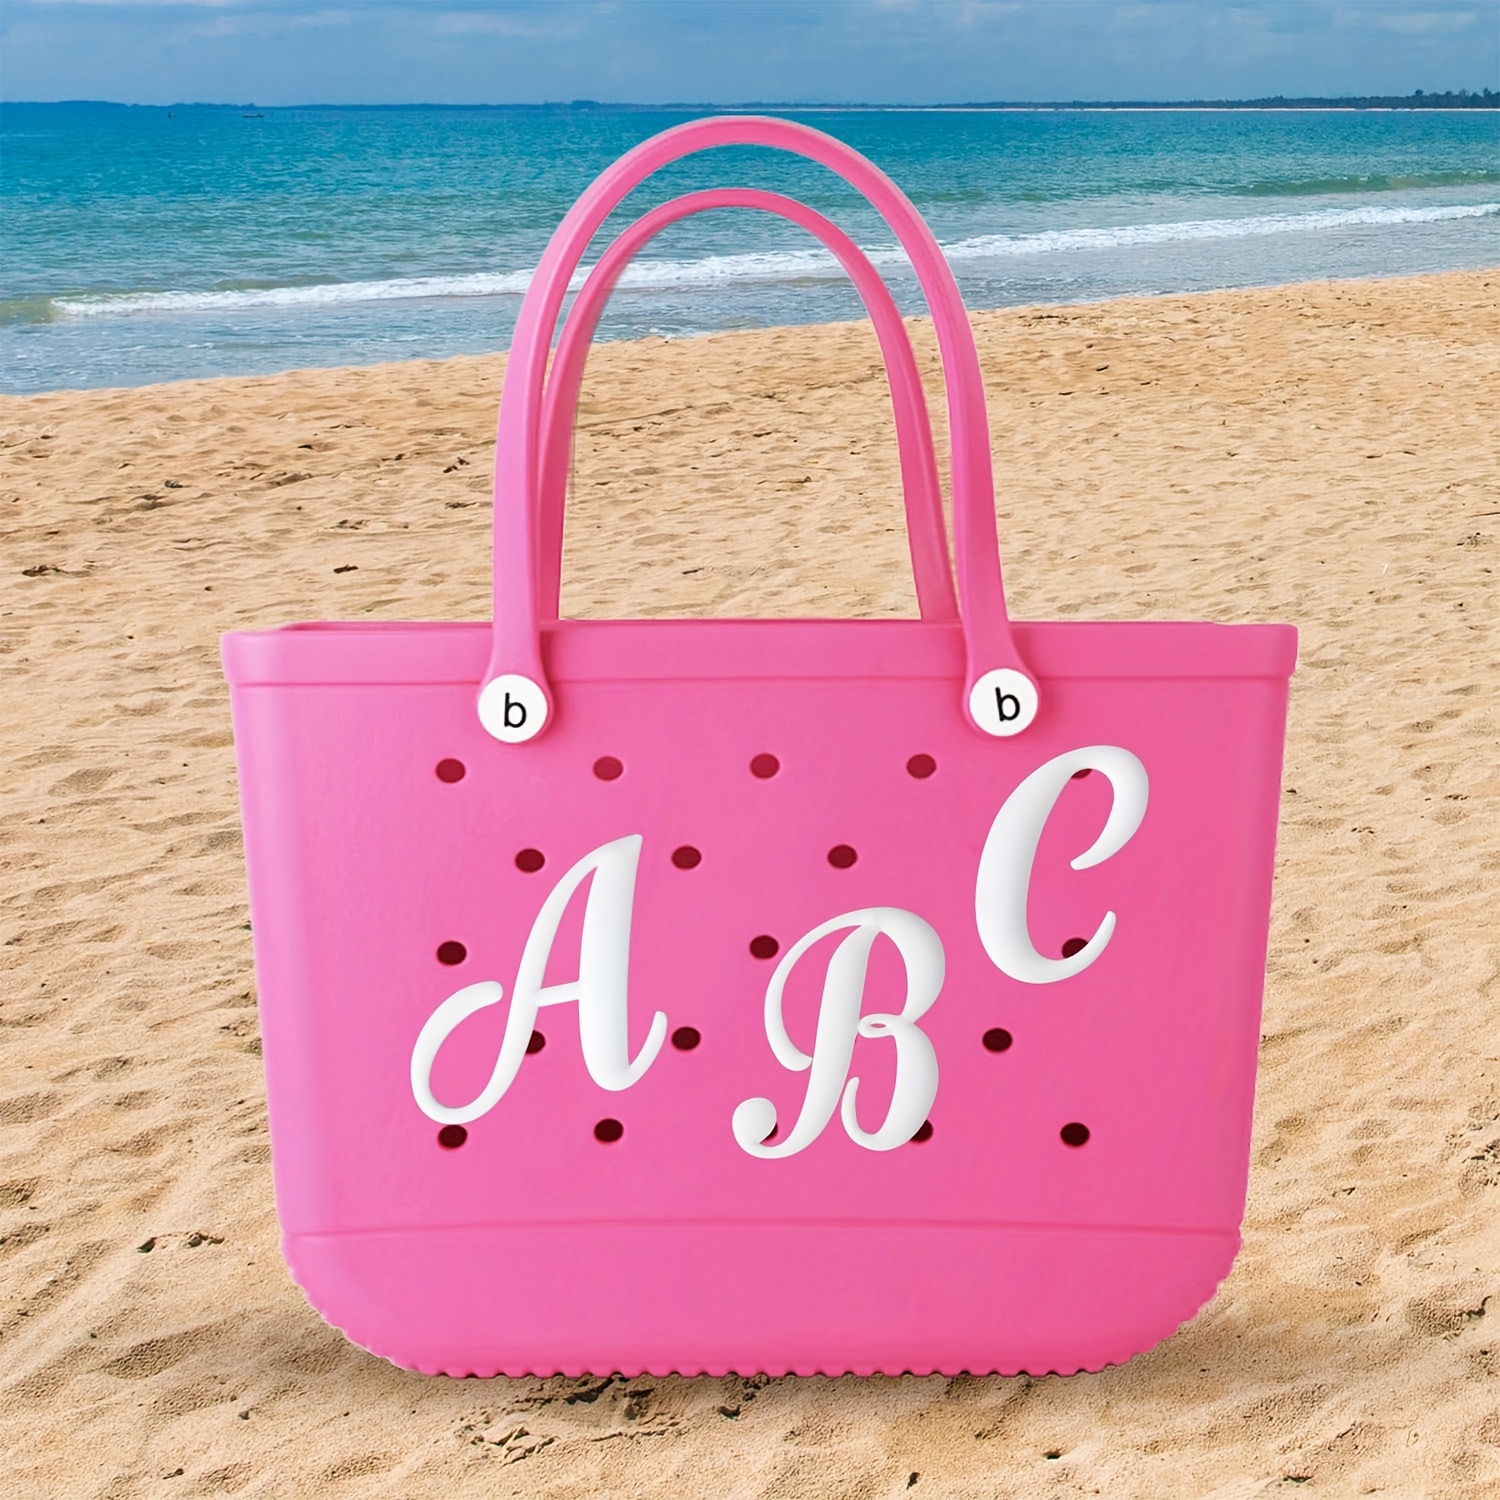 Flower Charms for Bogg Bag, Simply Southern Totes, and Similar Styles. Acrylic 3 Flower Charm Accessories for Beach Totes